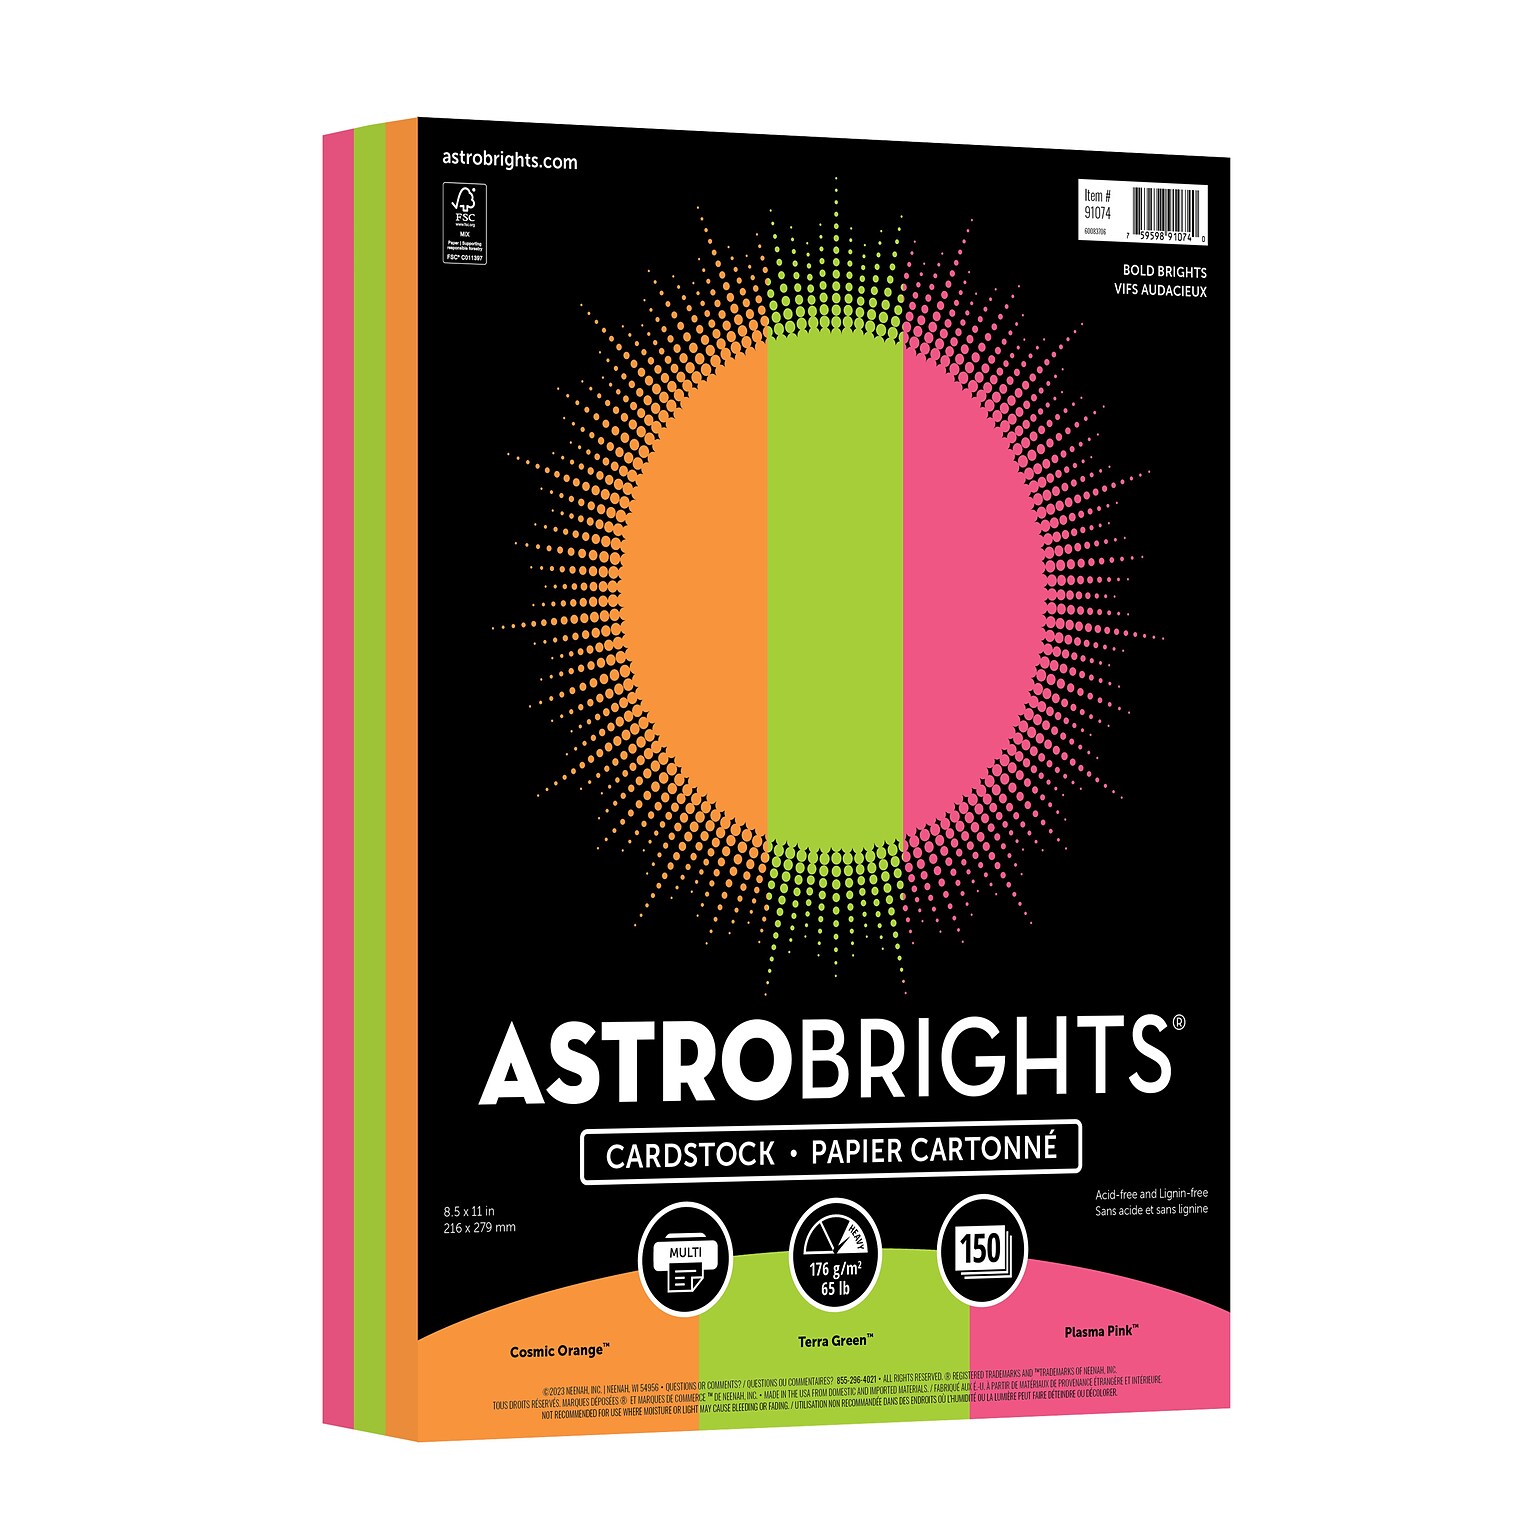 Astrobrights Bold Brights 65 lb. Cardstock Paper, 8.5 x 11, Assorted Colors, 150 Sheets/Pack (91074)